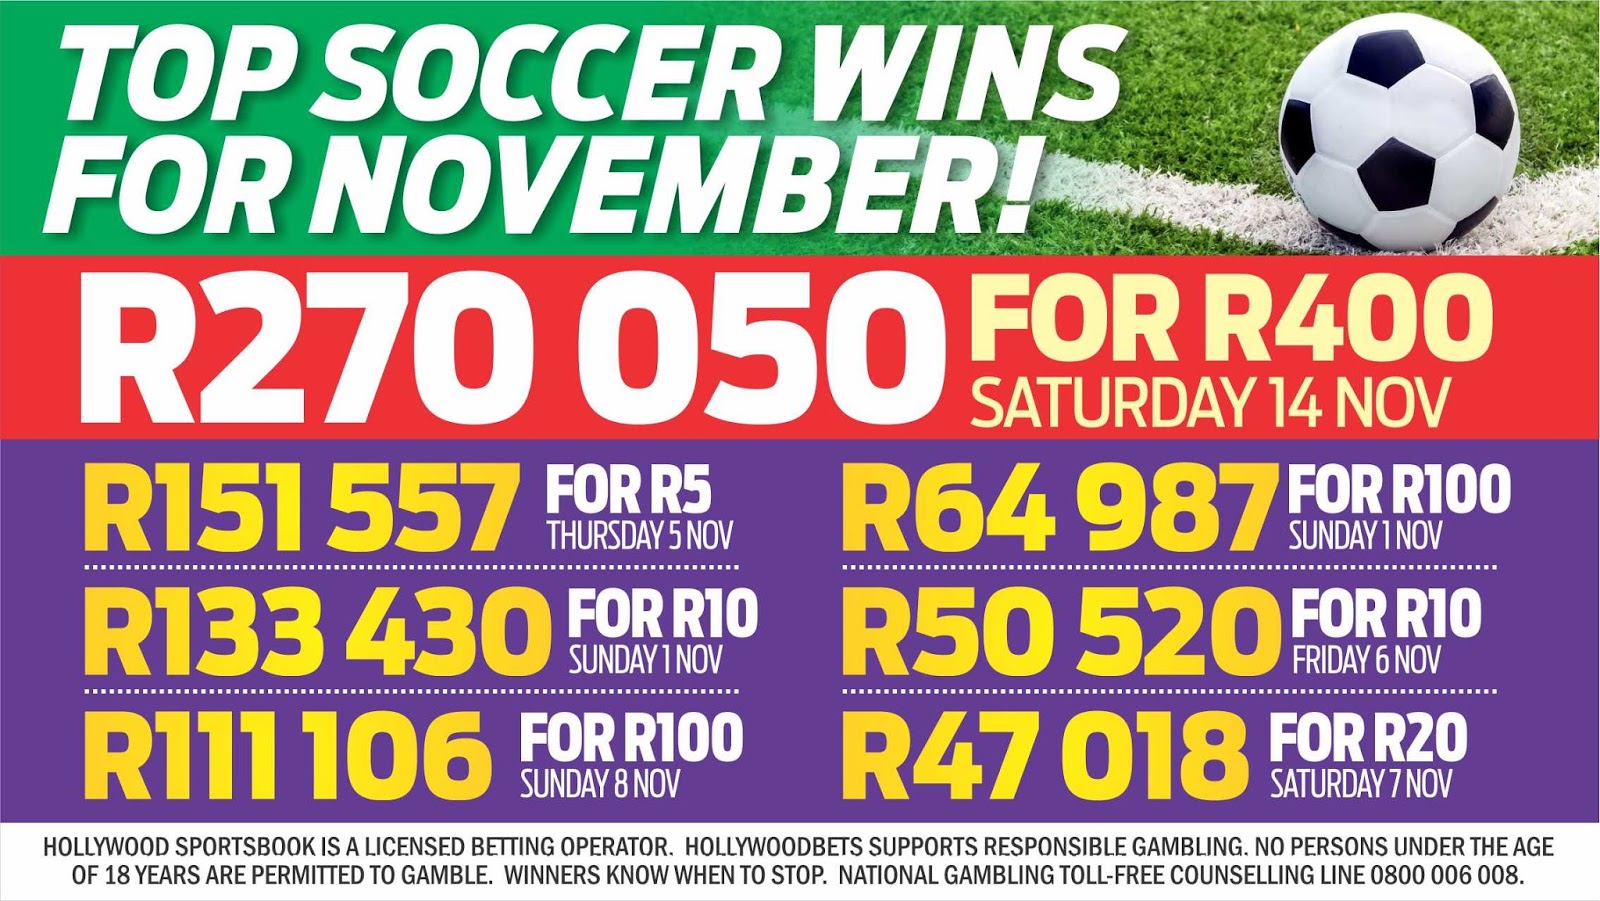 Hollywoodbets Top Soccer Wins Betting November 5